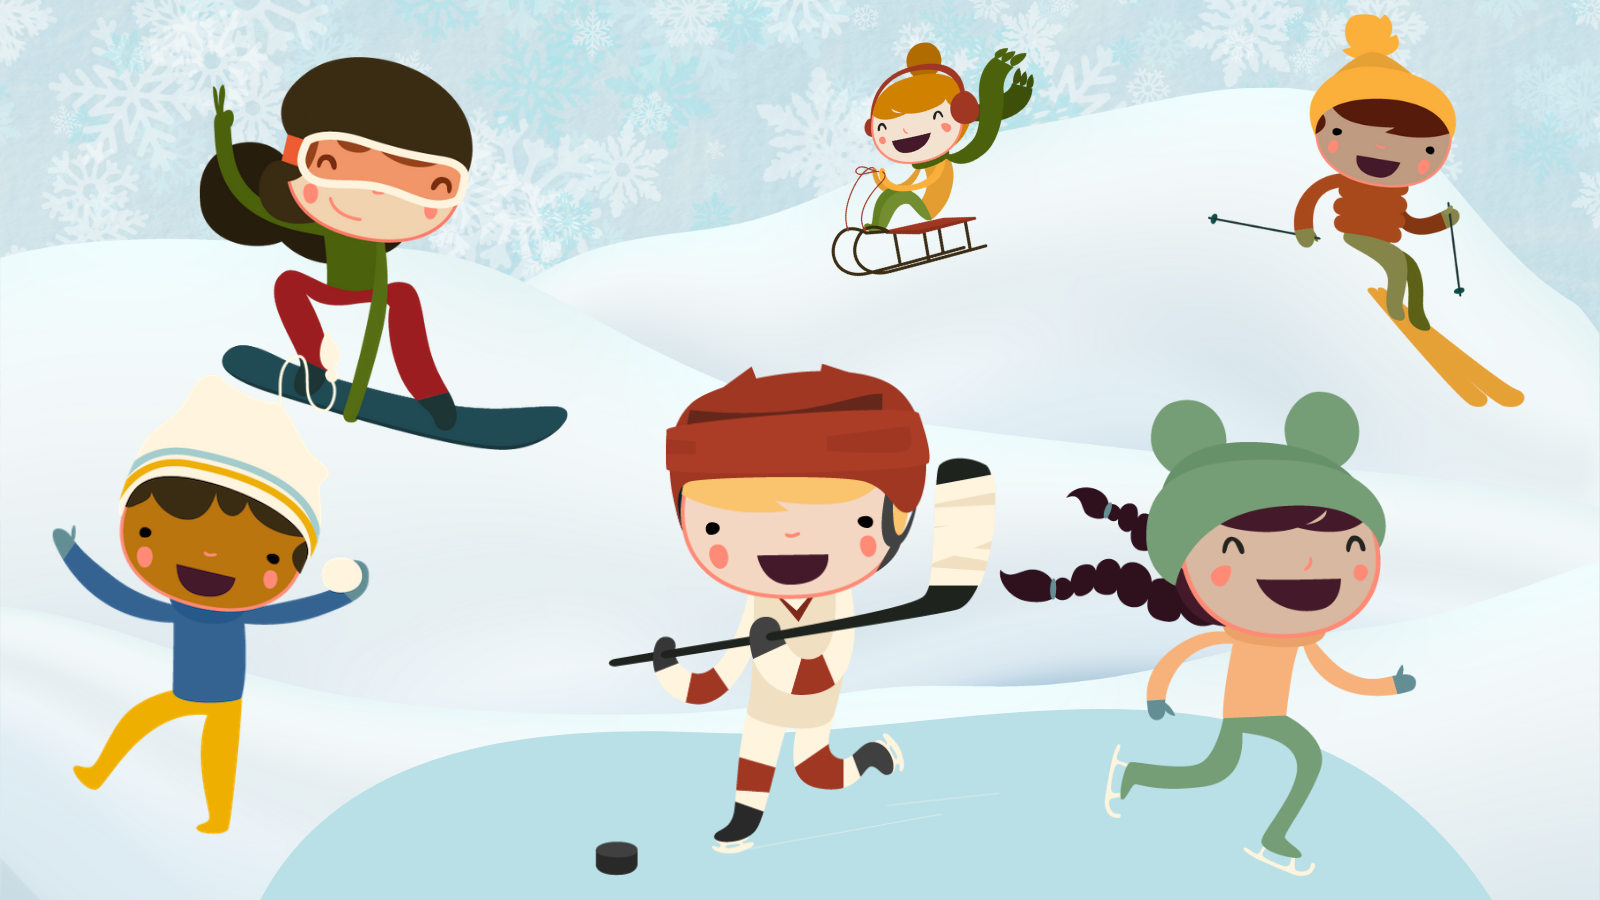 digital illustration of six kids playing winter sports in the snow and on an ice rink with a snowy background.